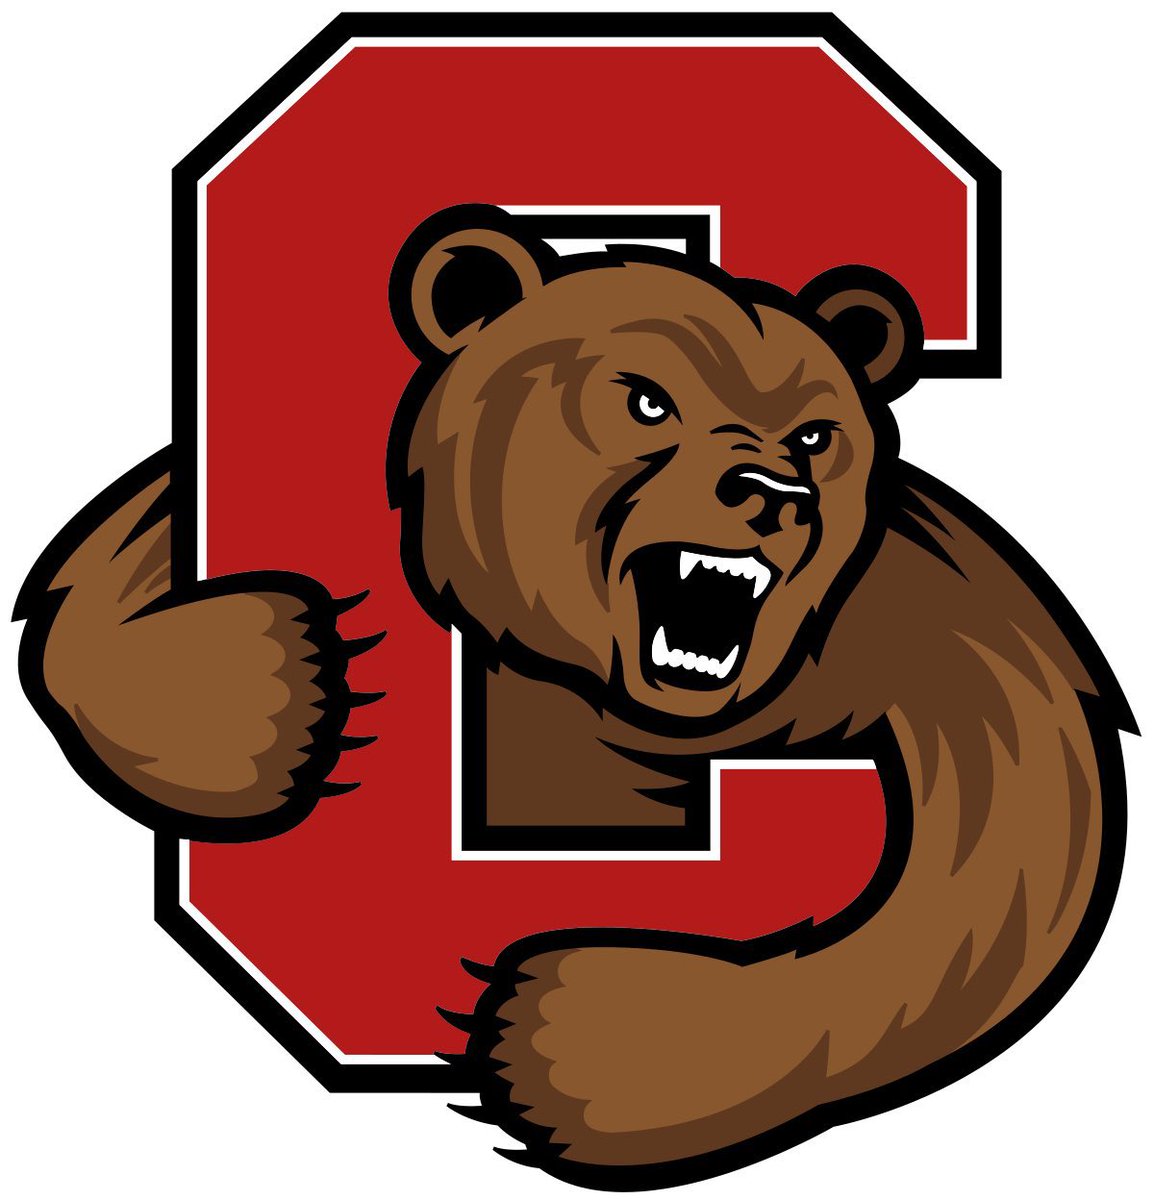 After a great conversation with @CoachBhakta I am blessed to receive my first Division 1 offer from Cornell University @BigRed_Football @DanSwanstrom @gowestfieldfb @247Sports @MaxPreps @PrepRedzoneTX @Rivals @coach_u87 @Coach_Bragg @Meeks38 @CoachMorales56 @DezBlackCoach